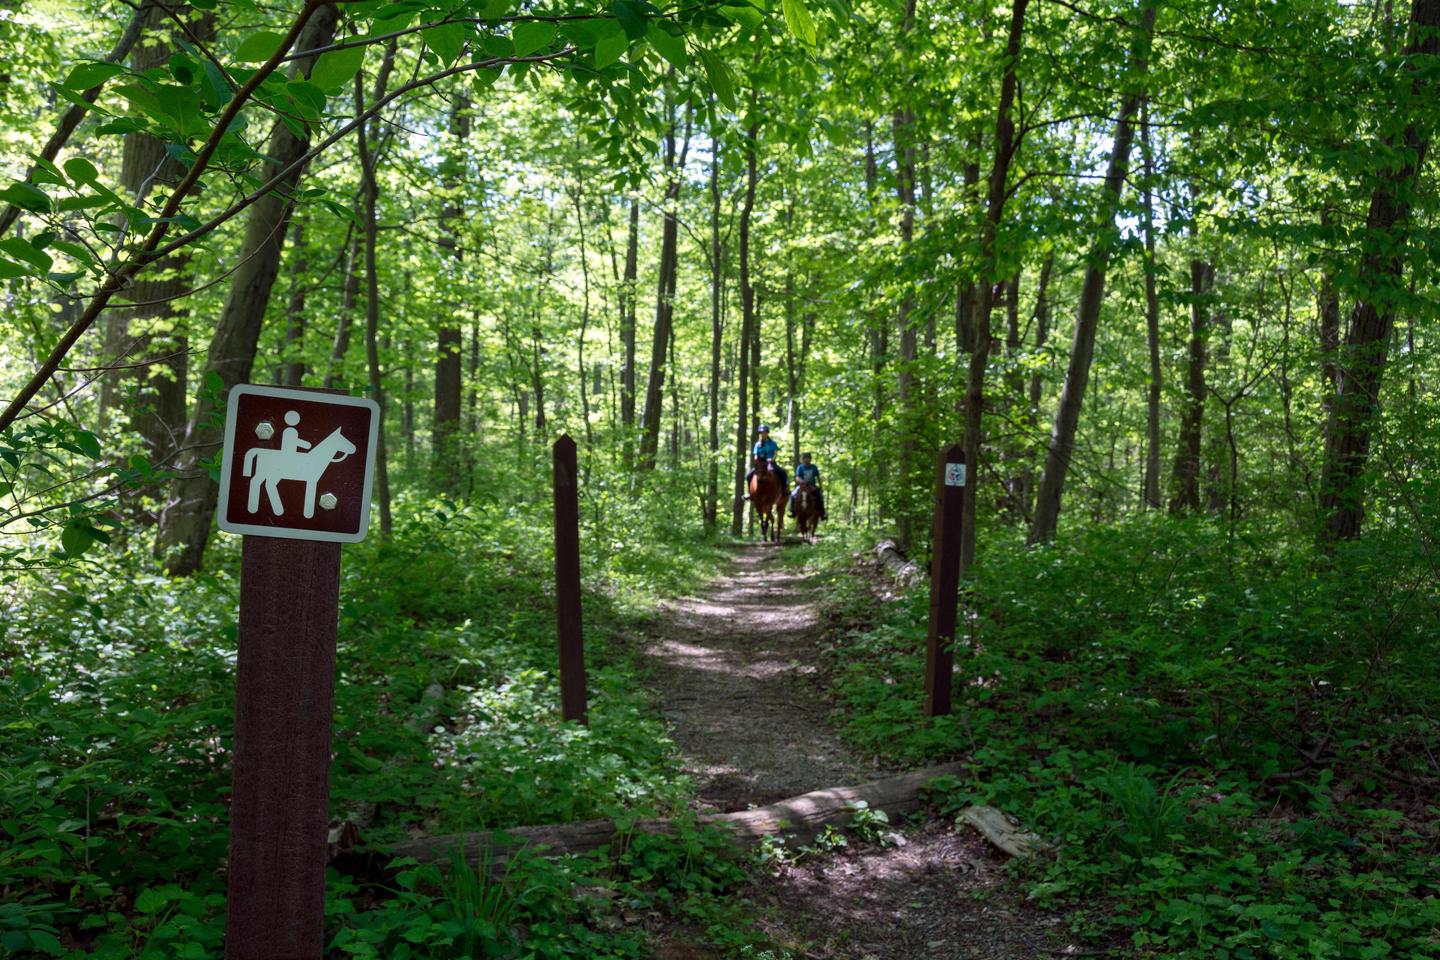 The Horse TrailThe west side of the park is a popular trail riding destination.